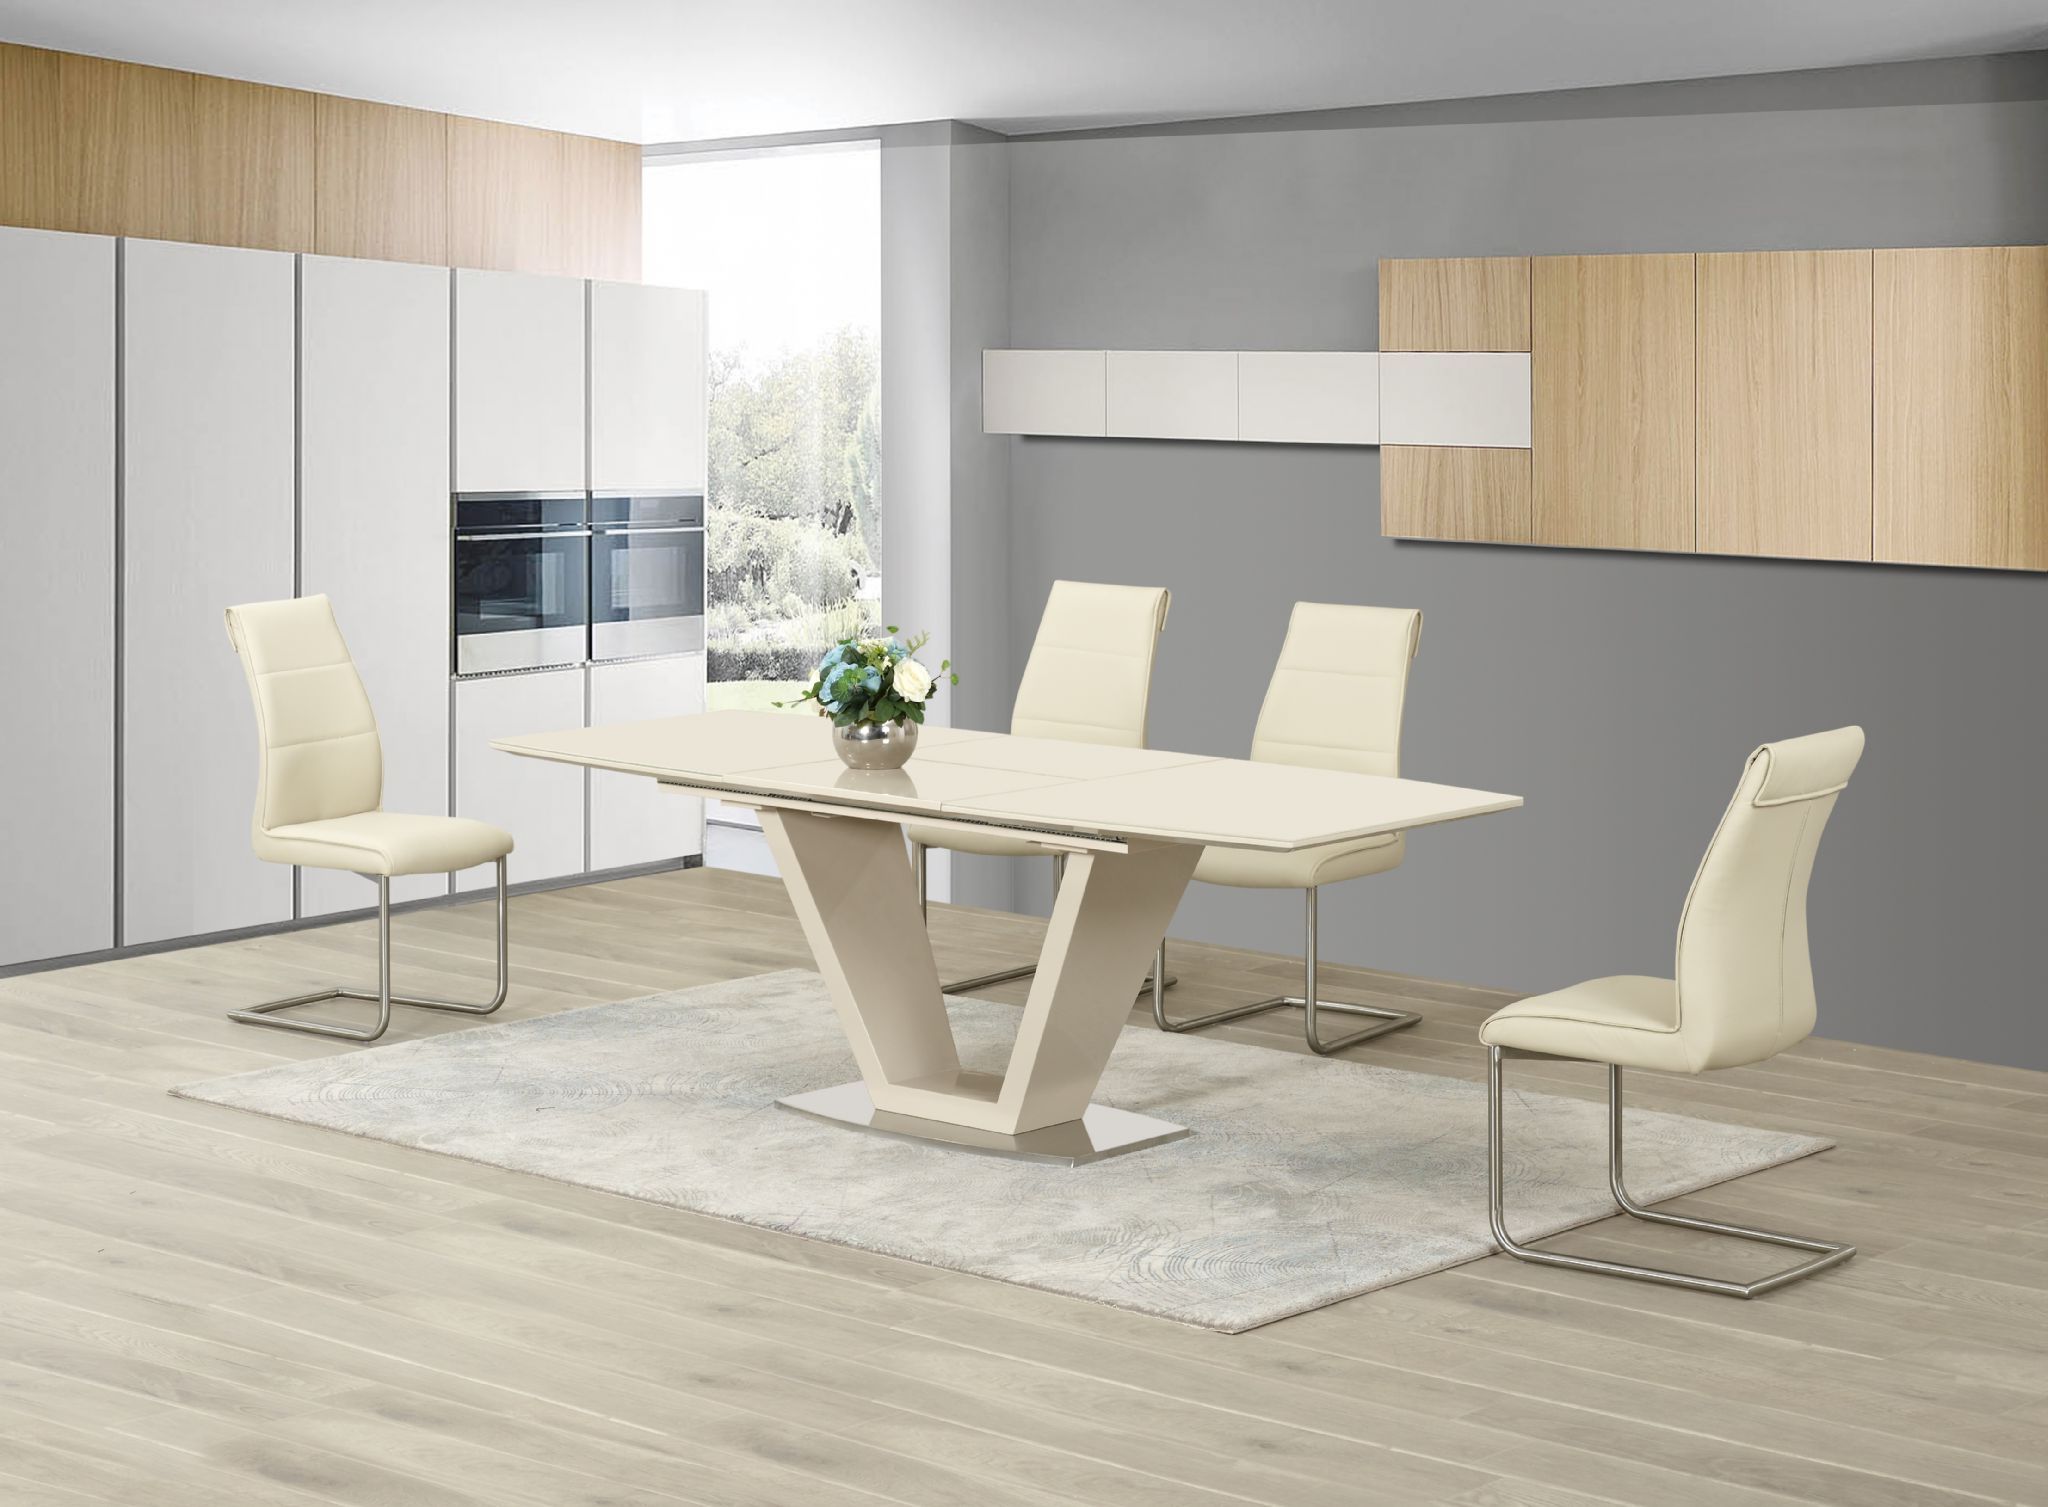 Modern Dining Room Tables Seats 8